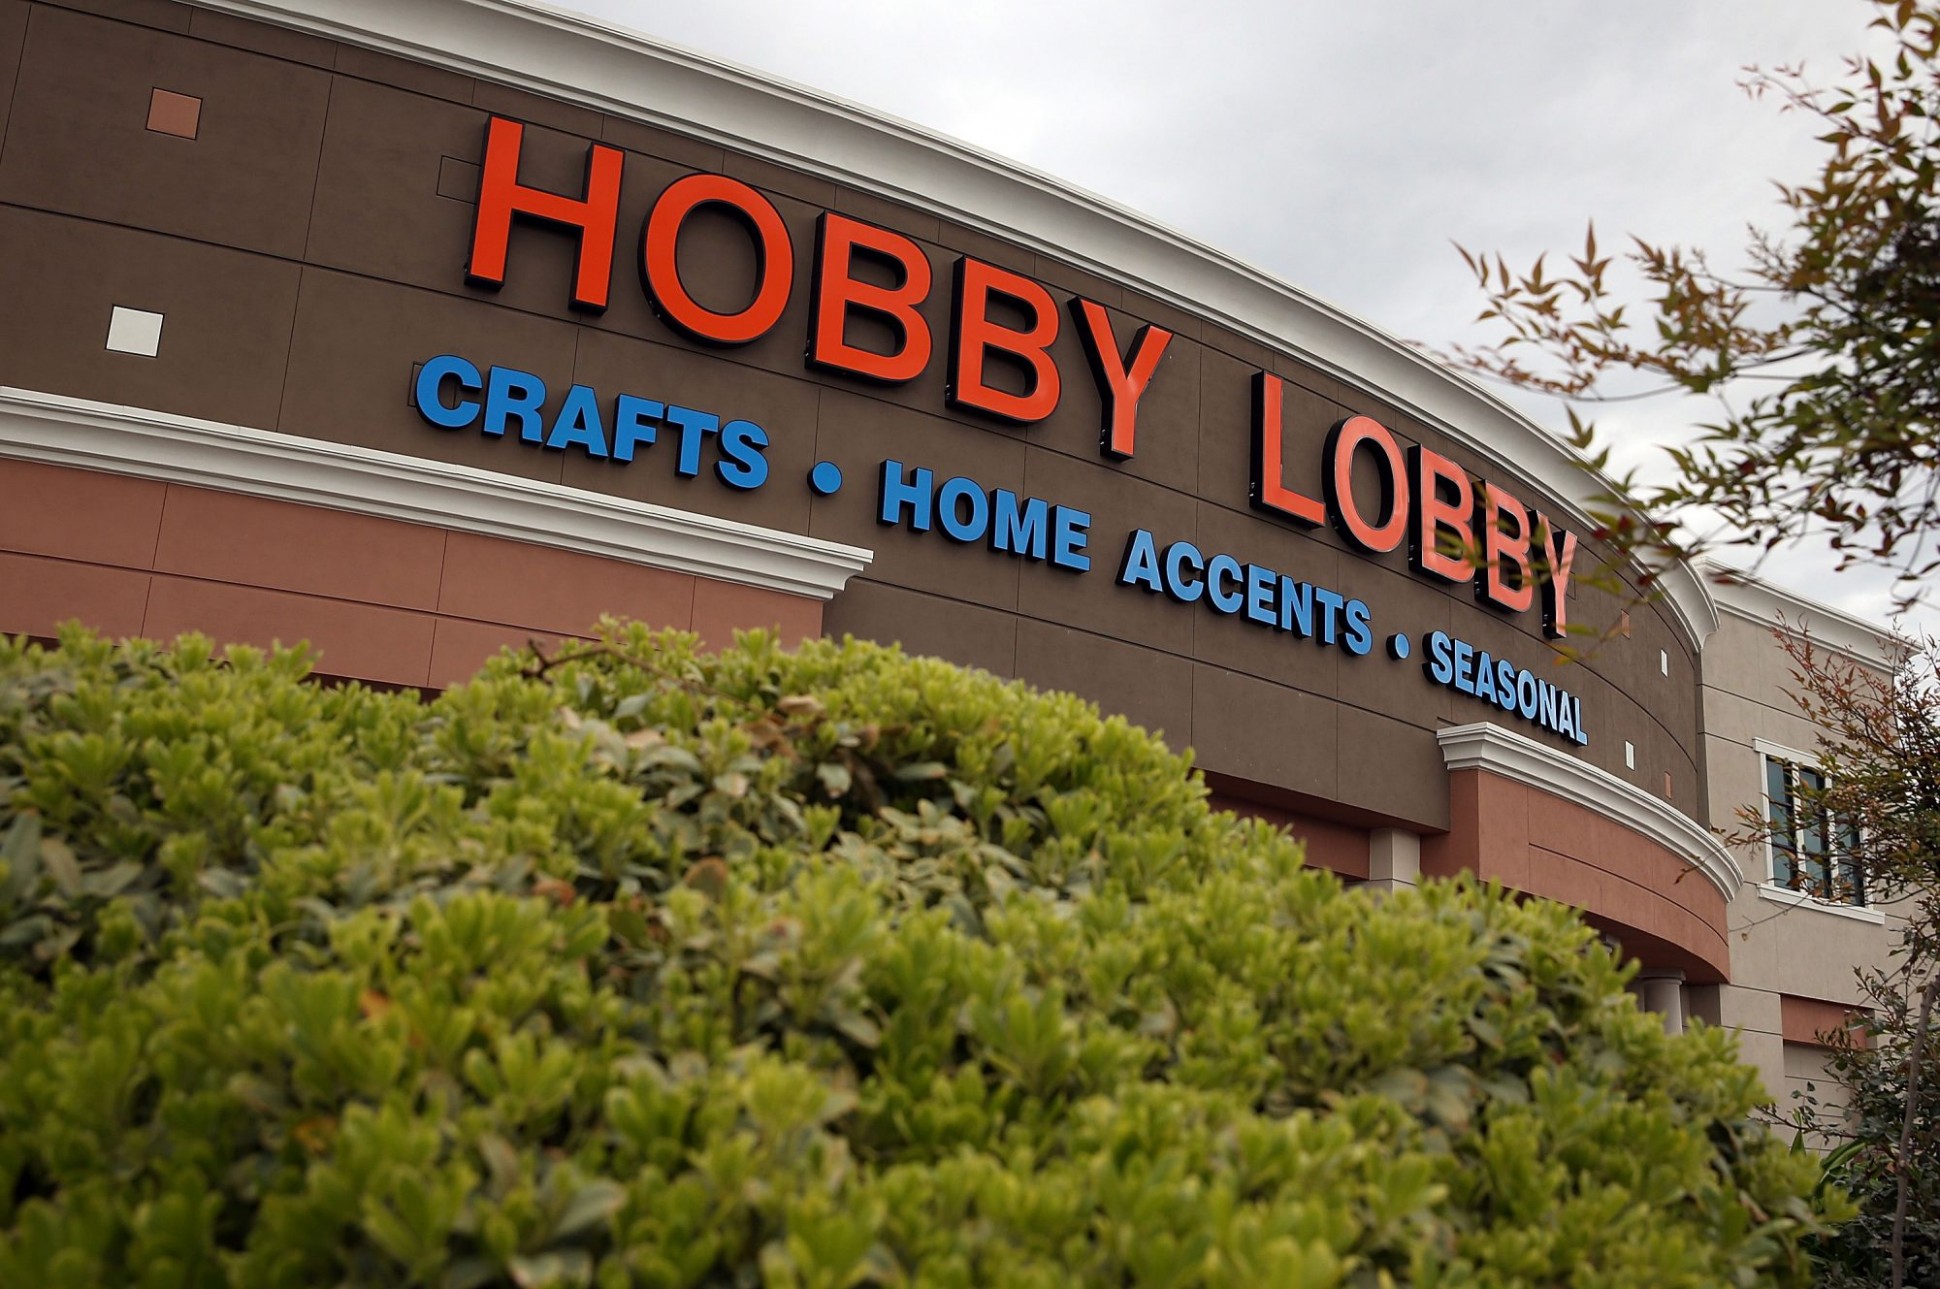 7 Tips For Shopping Hobby Lobby Like A Pro | Southern Living Hobby Lobby Furniture Sale